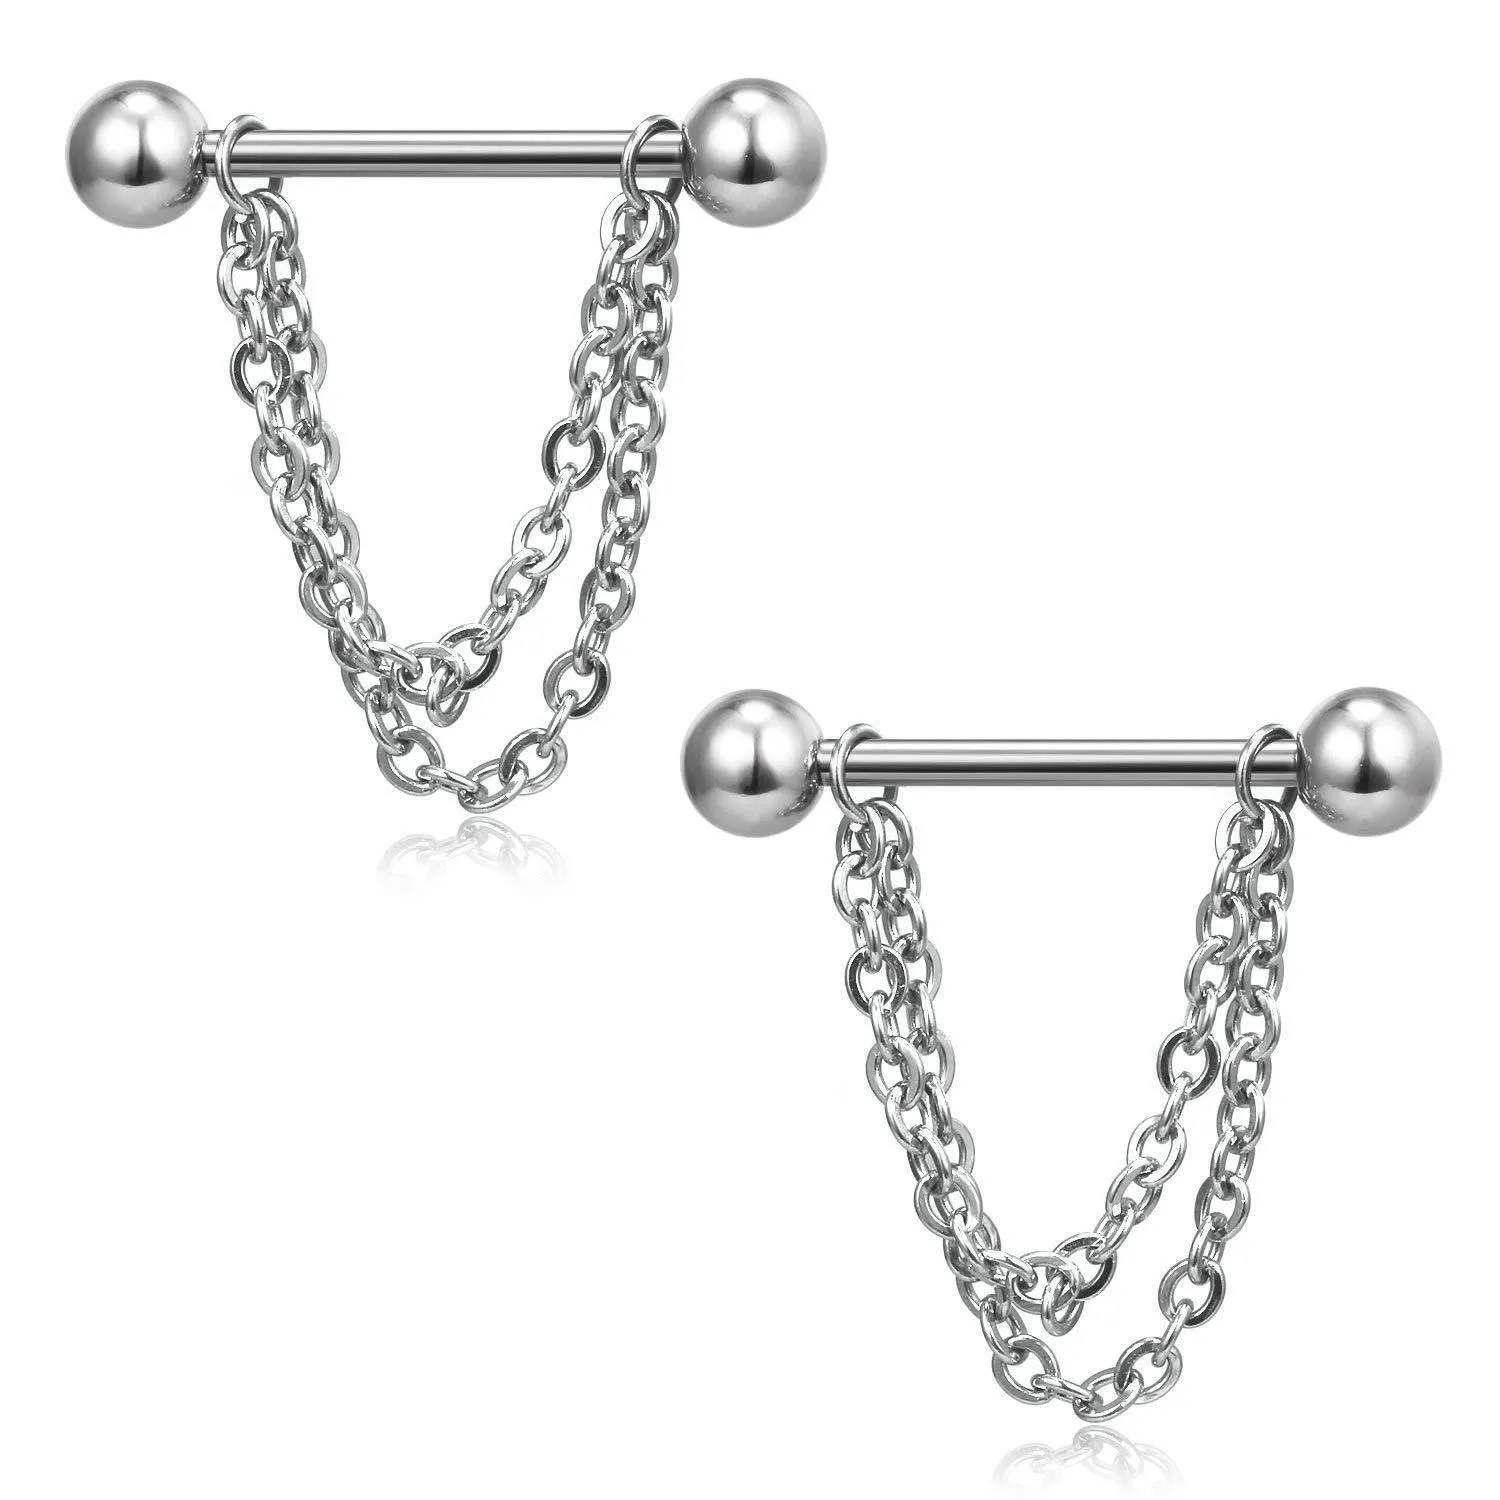 Stainless Steel Love dumbbell Nipple Shield Bar Ring Body Piercing Jewelry Hot 16mm